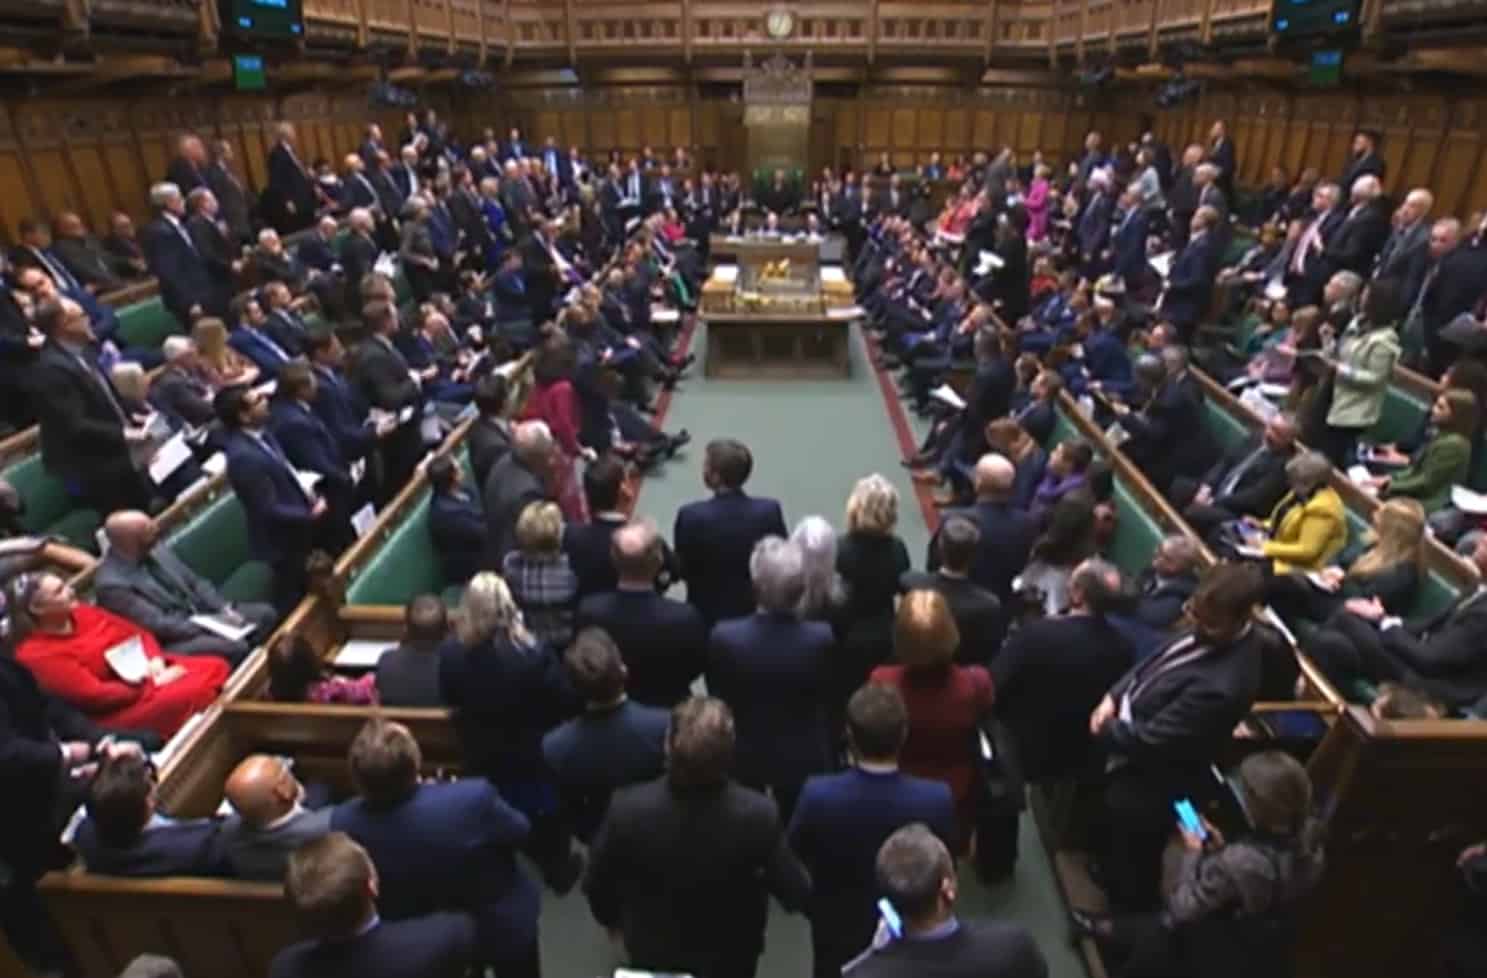 New changes could put an end to false statements being made in Parliament